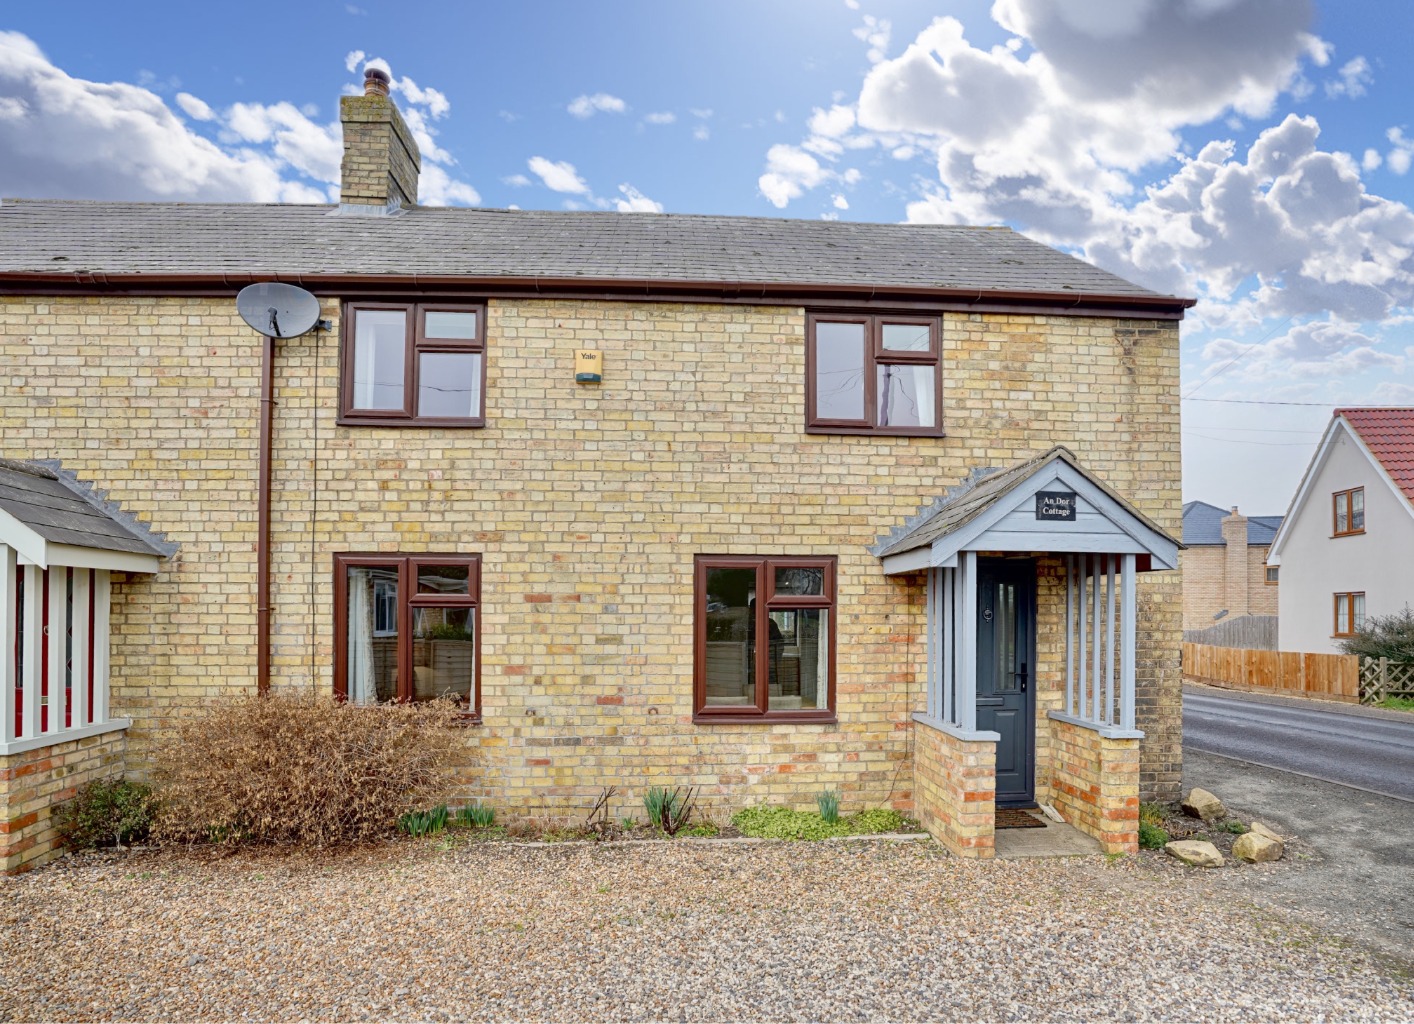 3 bed end of terrace house for sale in Warboys Road, Huntingdon, PE28